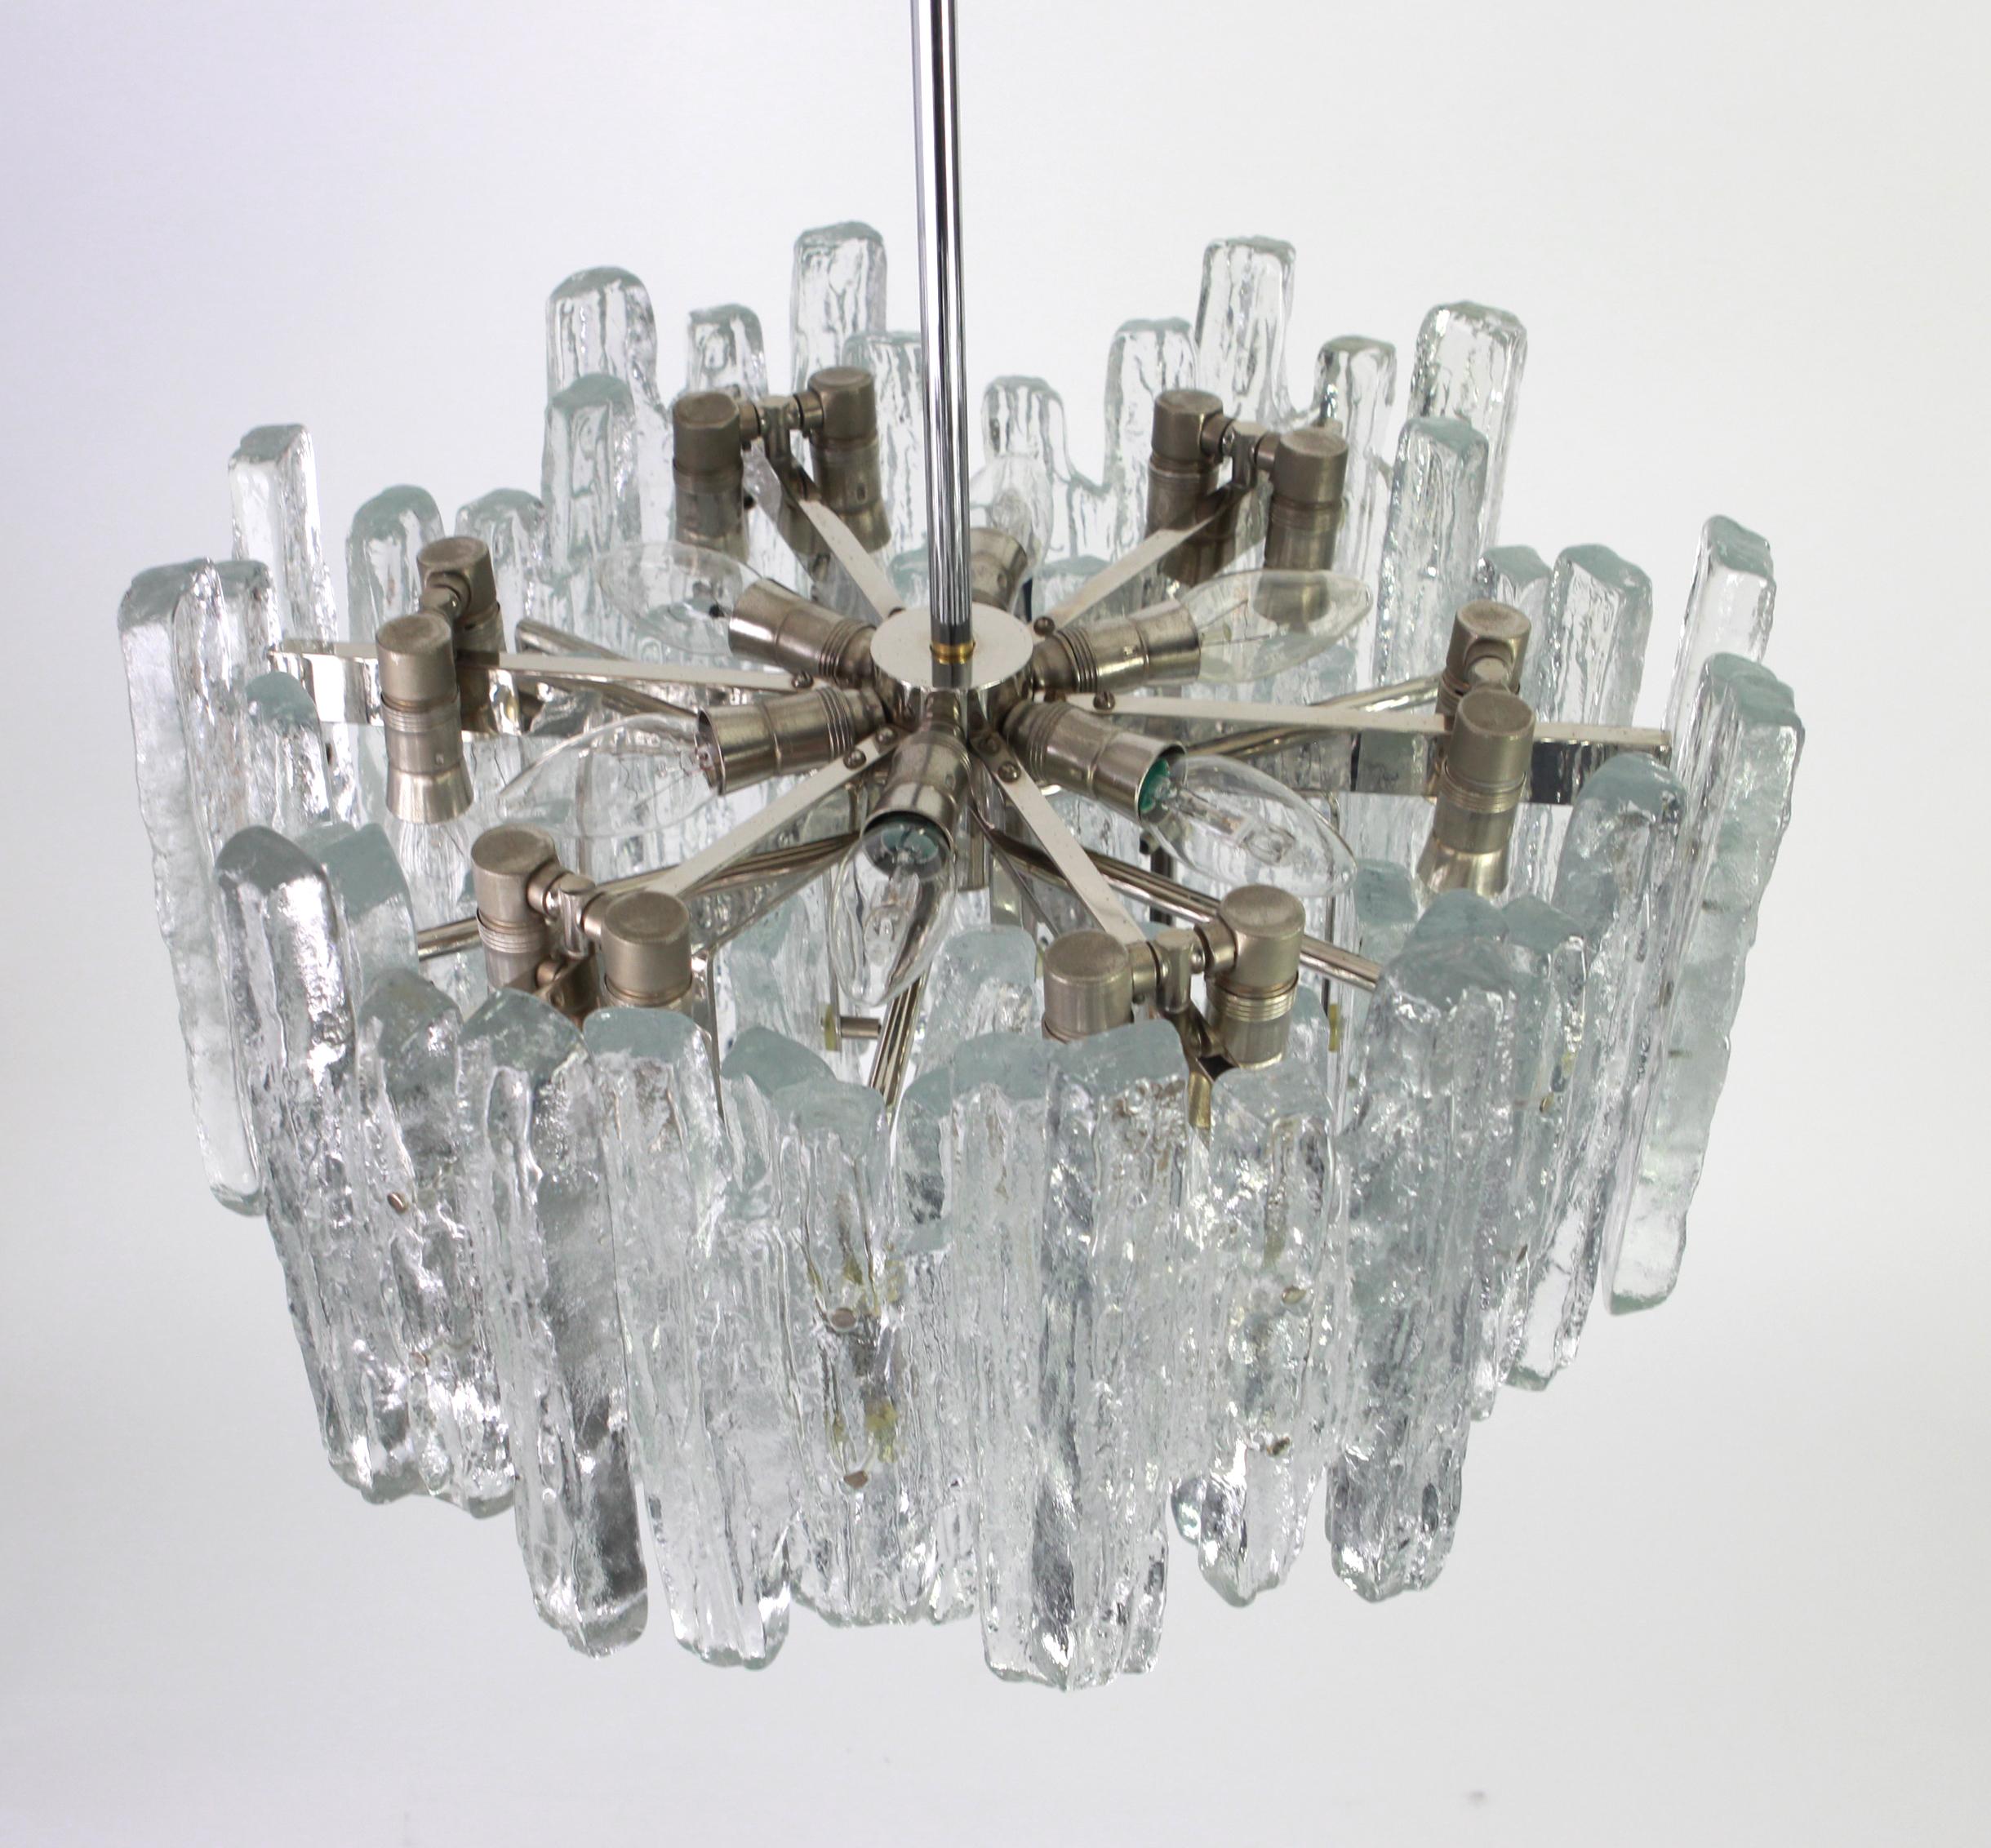 1 of 2 Large Rare Murano Ice Glass Chandelier by Kalmar, Austria, 1960s For Sale 2